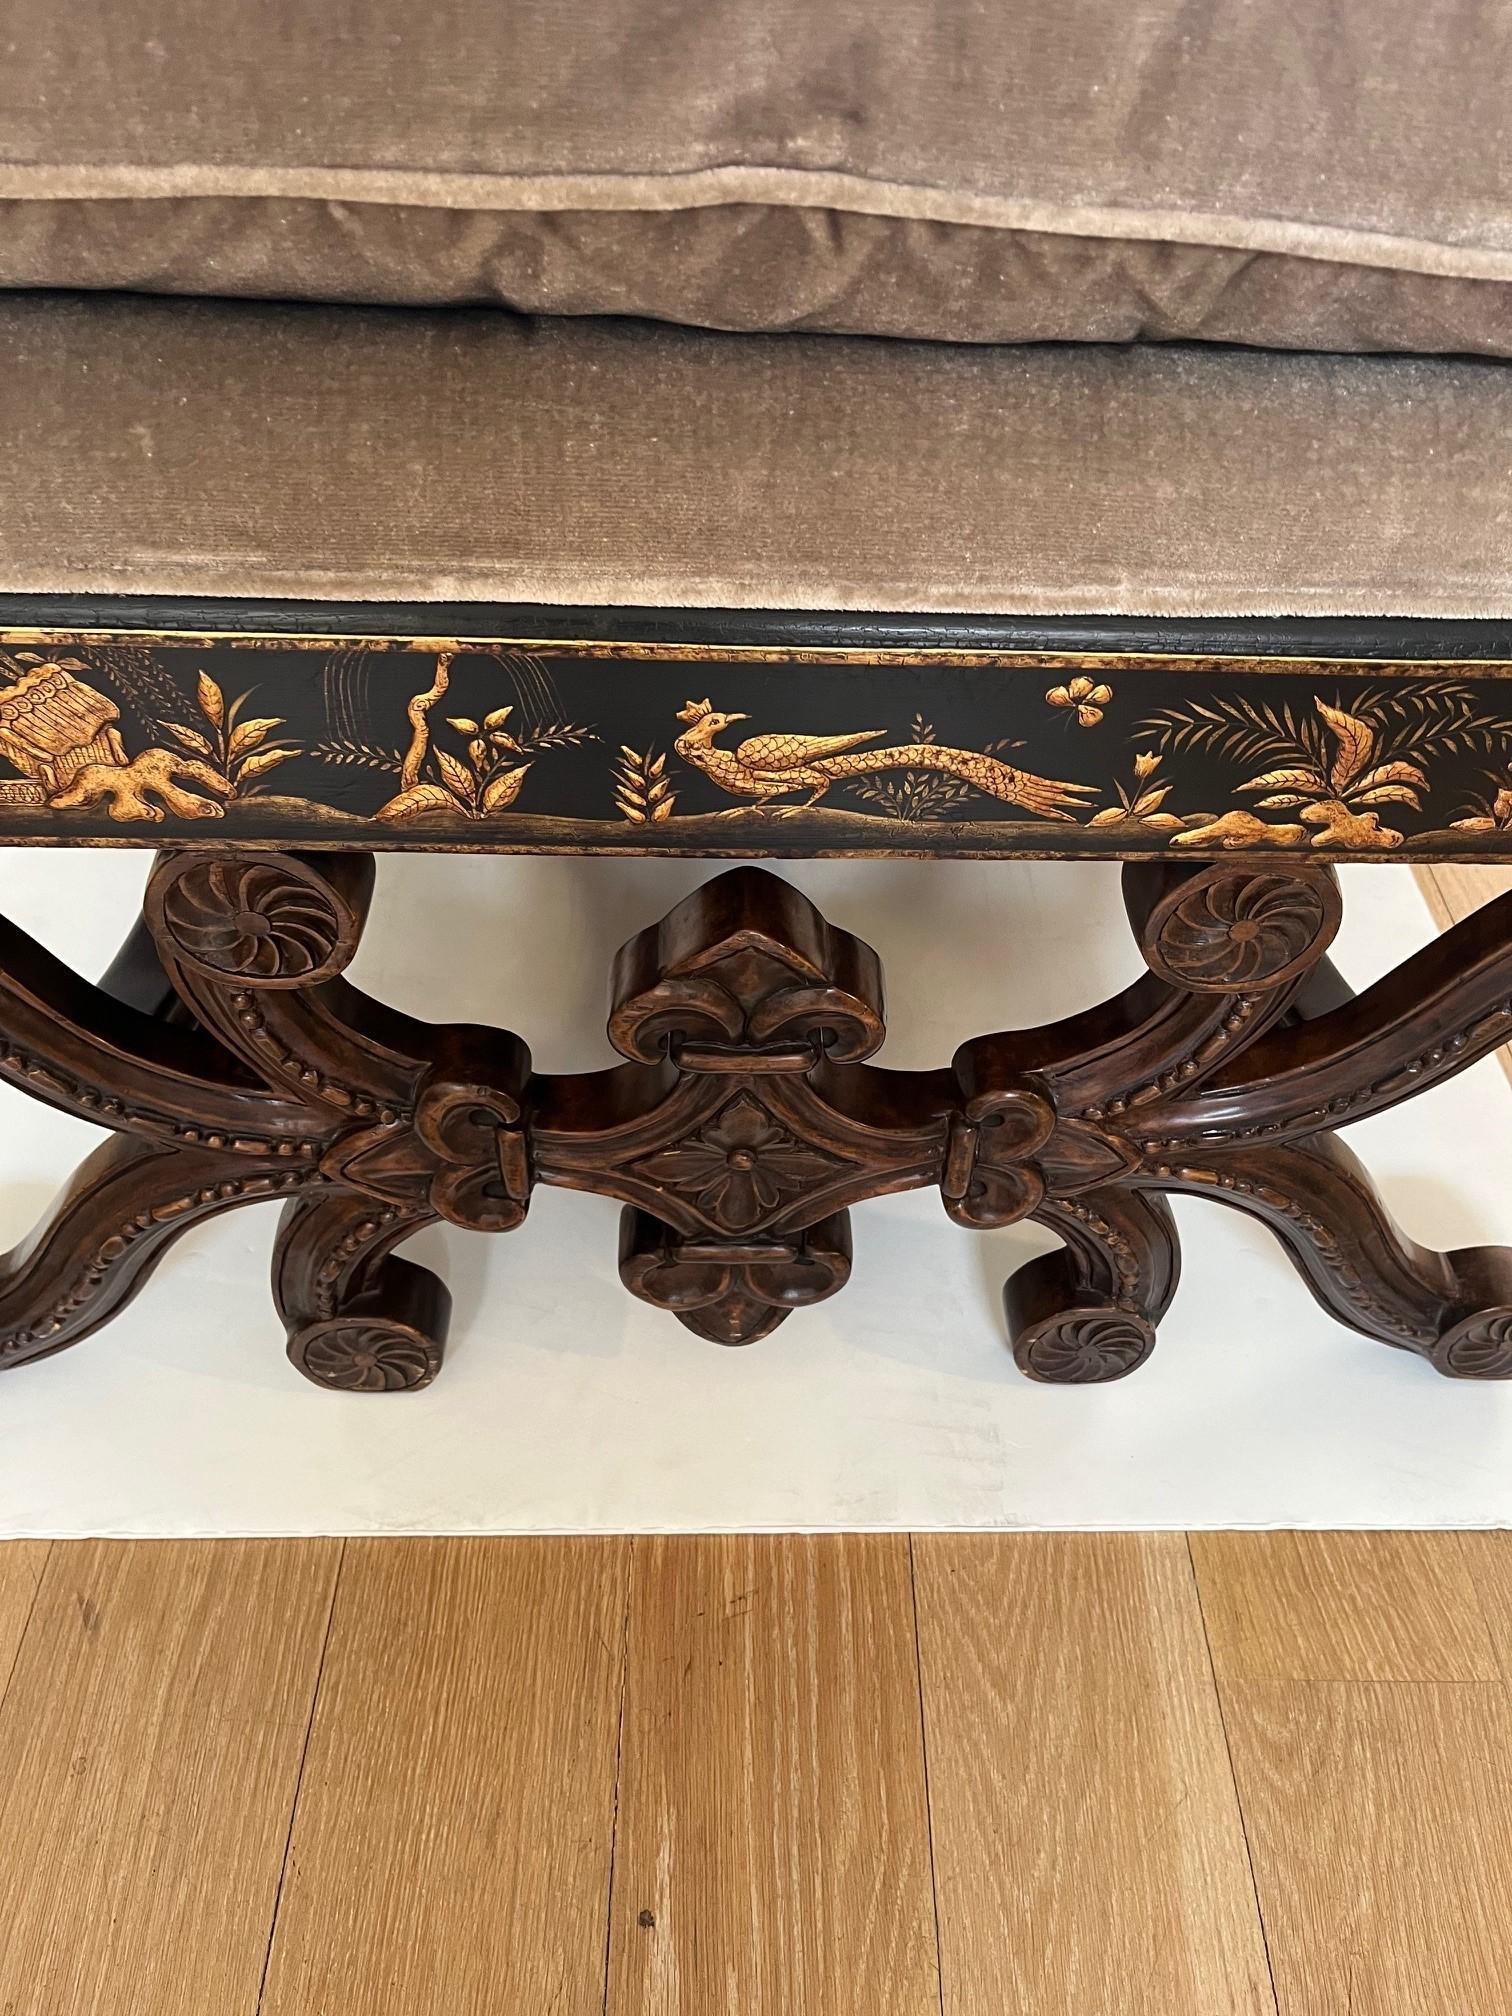 Made to Order 20-26 Chinoiserie Stool with 23kt Gold Raised Chinoiserie Detail For Sale 6